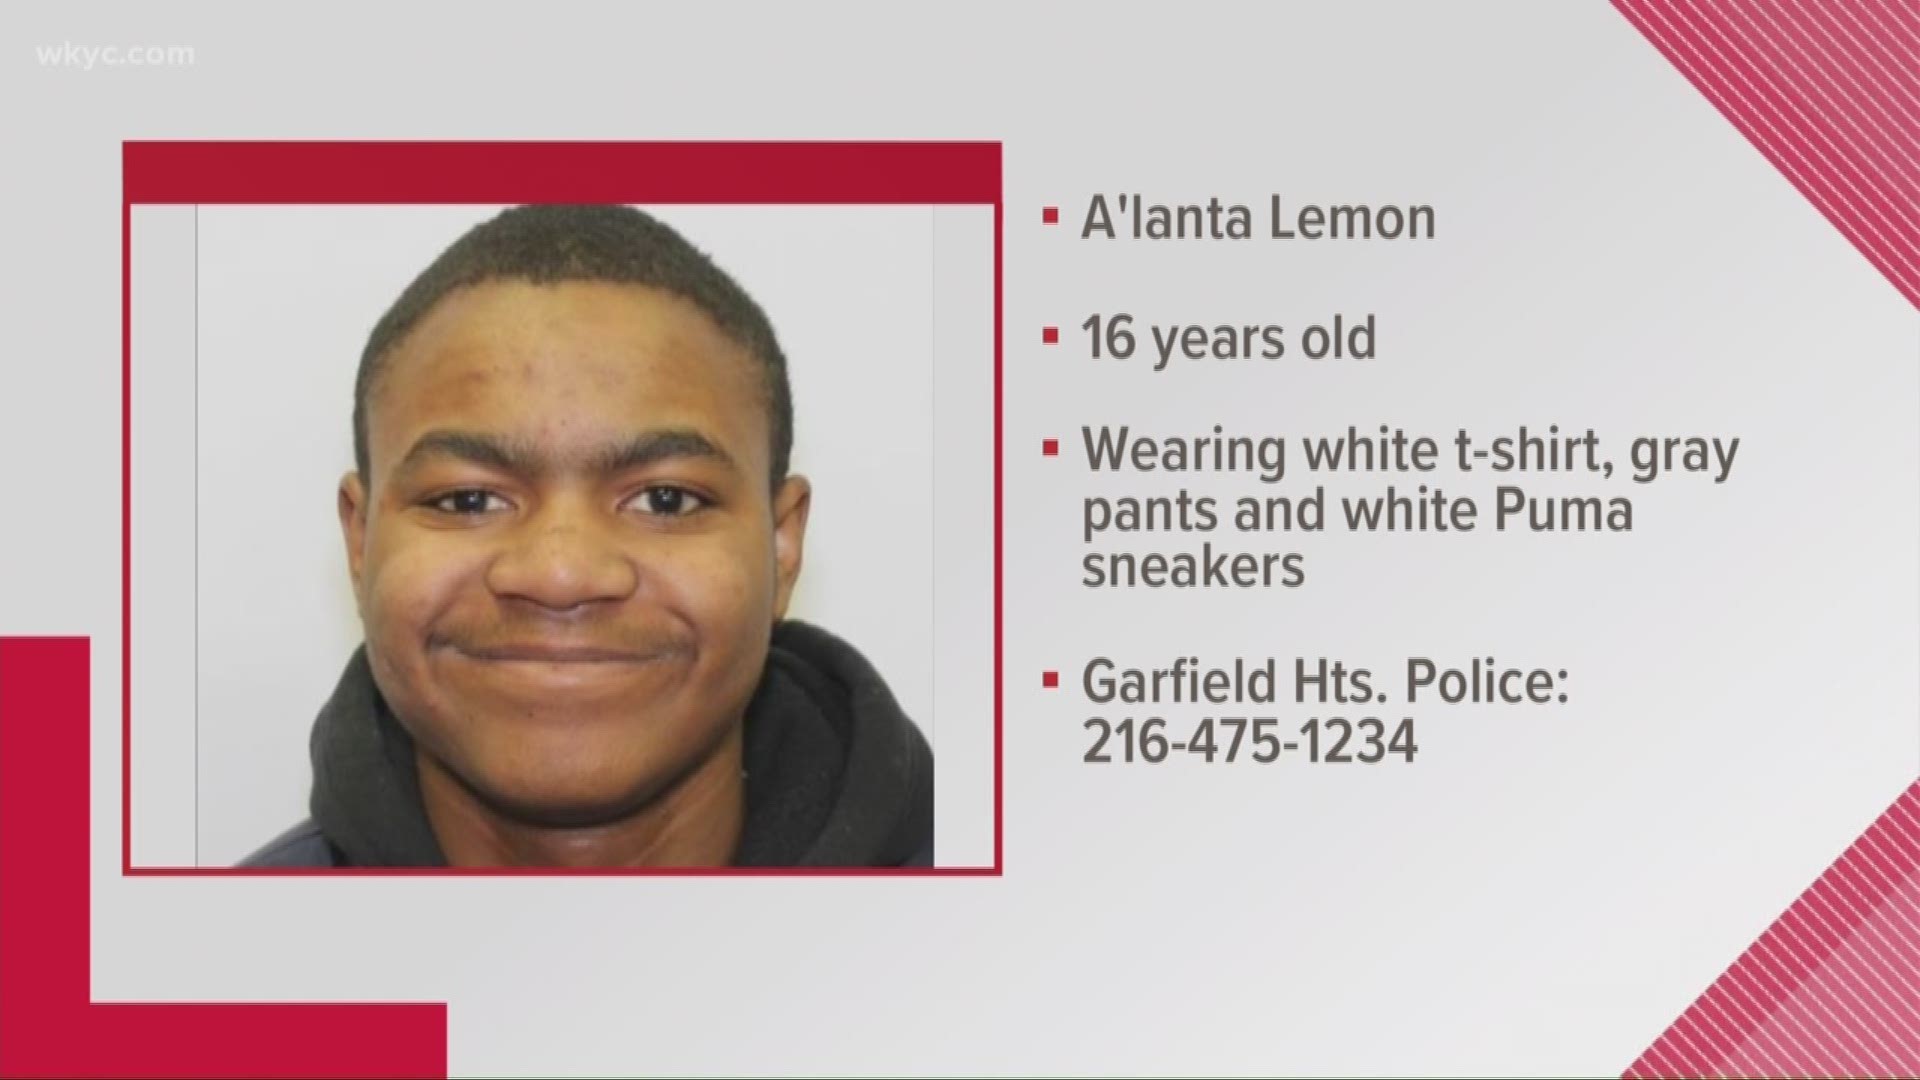 Aug. 8, 2019: Police in Garfield Heights are asking for the public’s help in finding a missing 16-year-old boy with autism. Police issued an alert for 16-year-old A’lante Lemon around 4:45 a.m. Thursday. A’lante was last seen around midnight at home, and police say he may be trying to leave the area on a Greyhound bus.